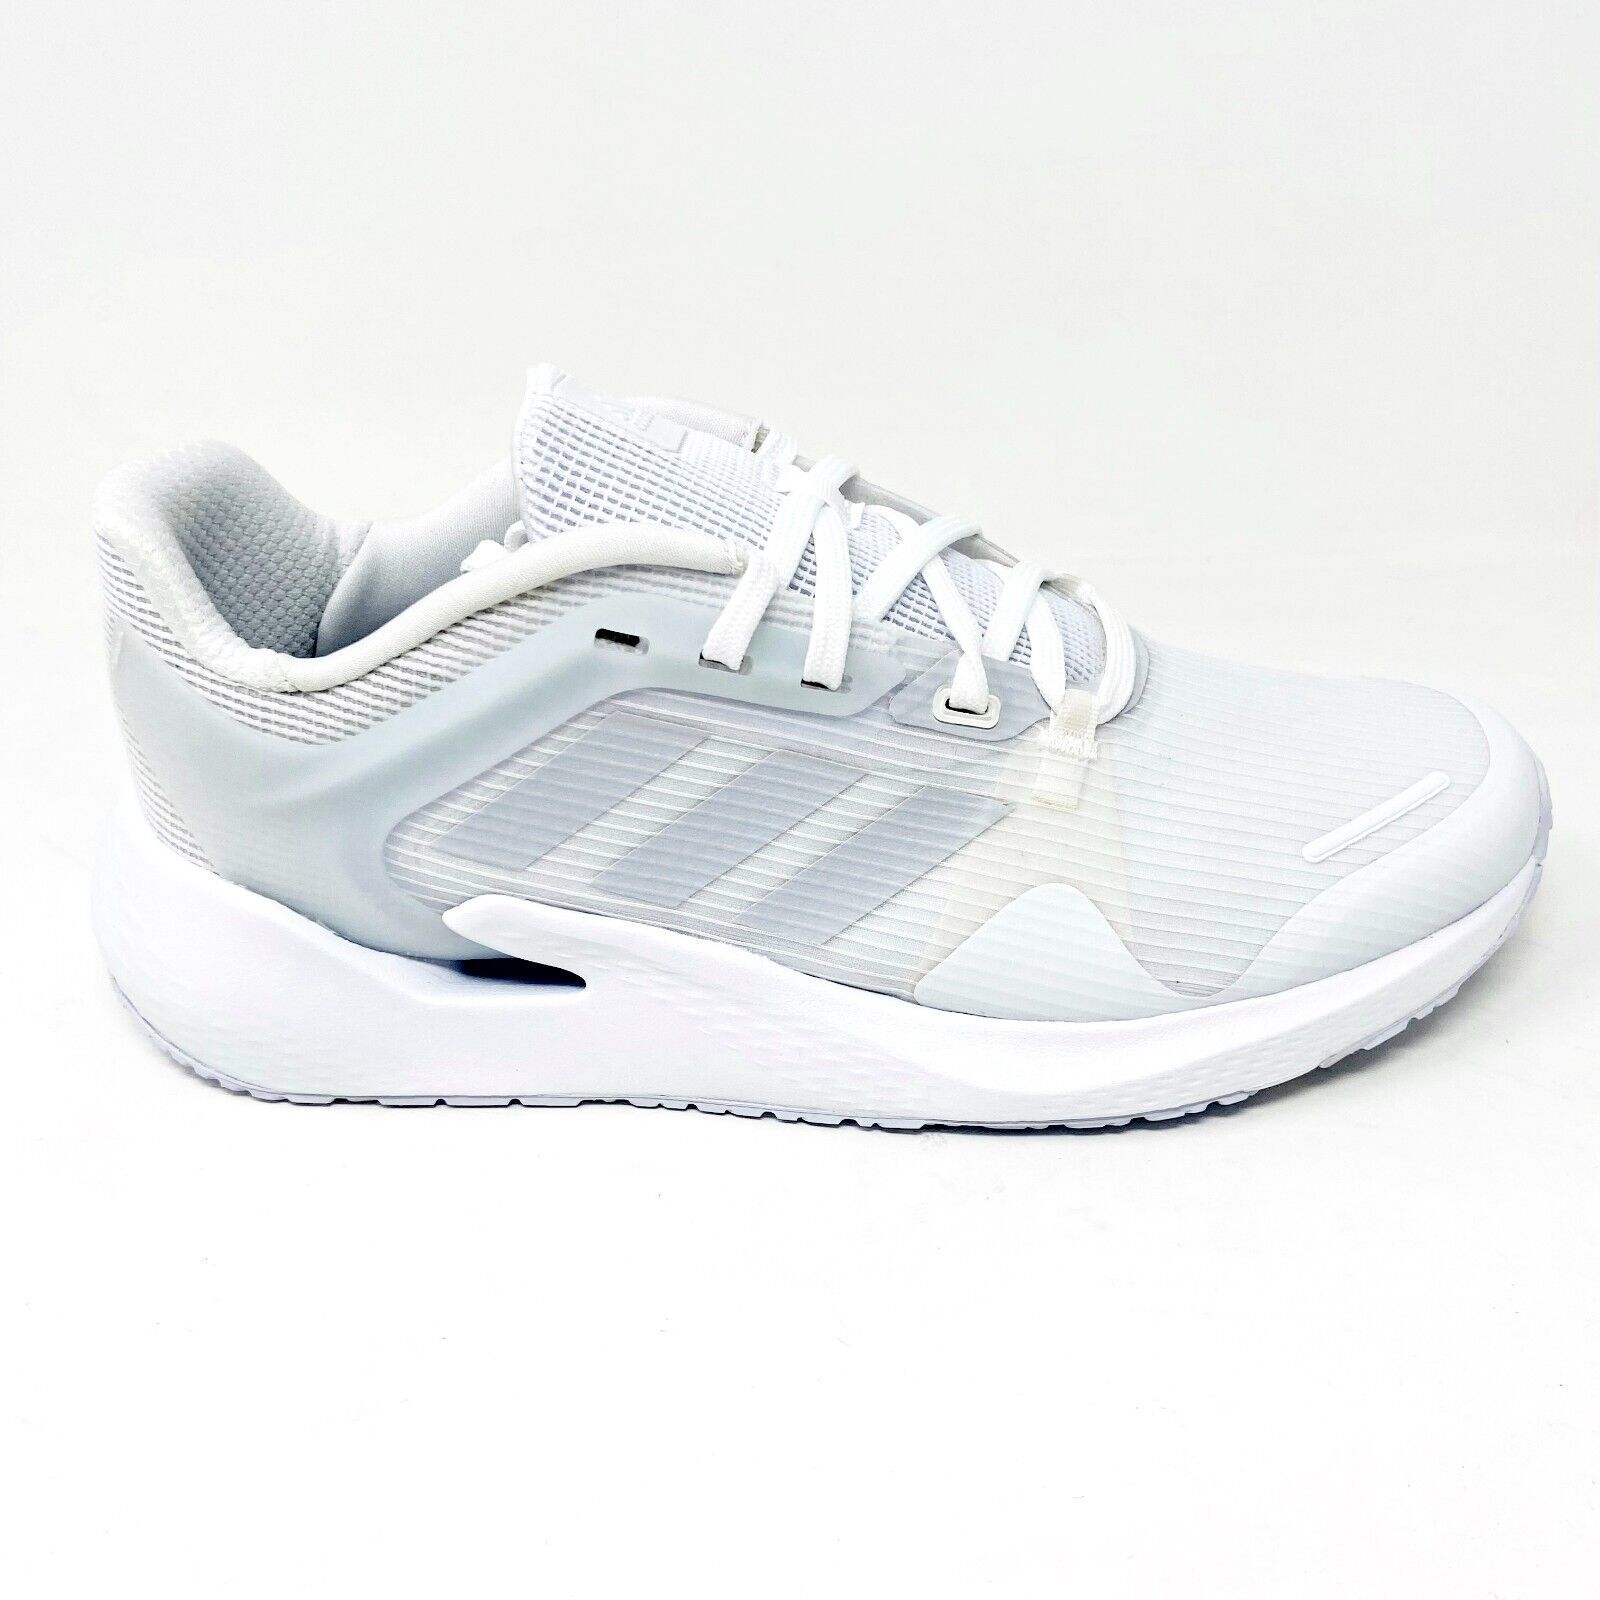 Adidas Alphatorsion Triple White Mens Running Sneakers FY0003